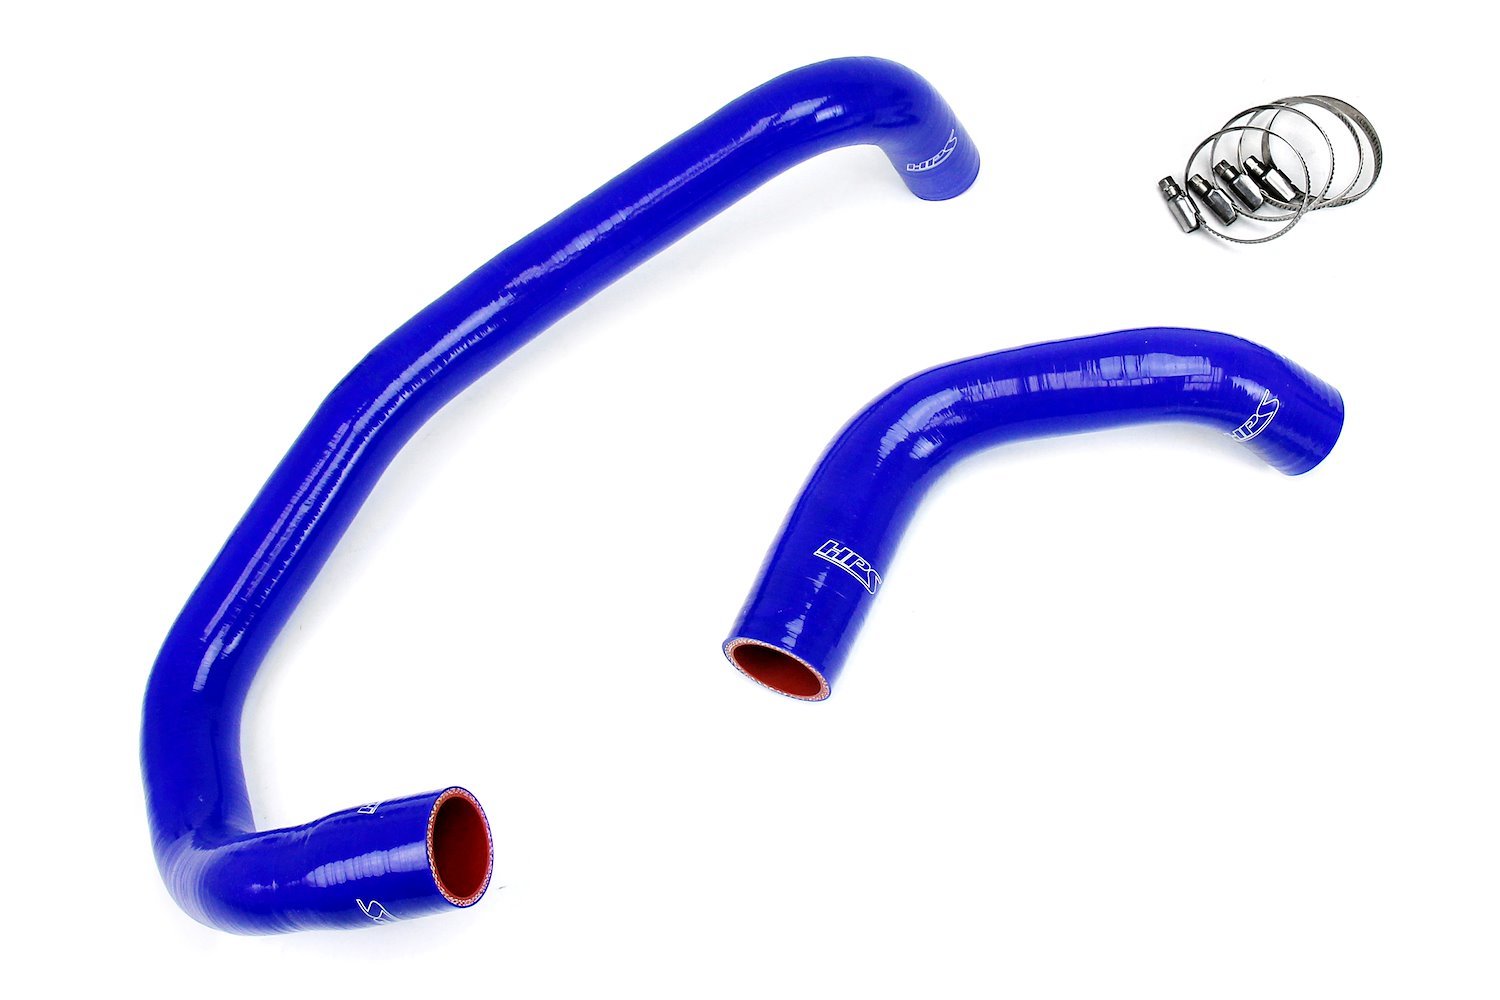 57-1326R-BLUE Radiator Hose Kit, High-Temp 3-Ply Reinforced Silicone, Replaces OEM Rubber Radiator Coolant Hoses